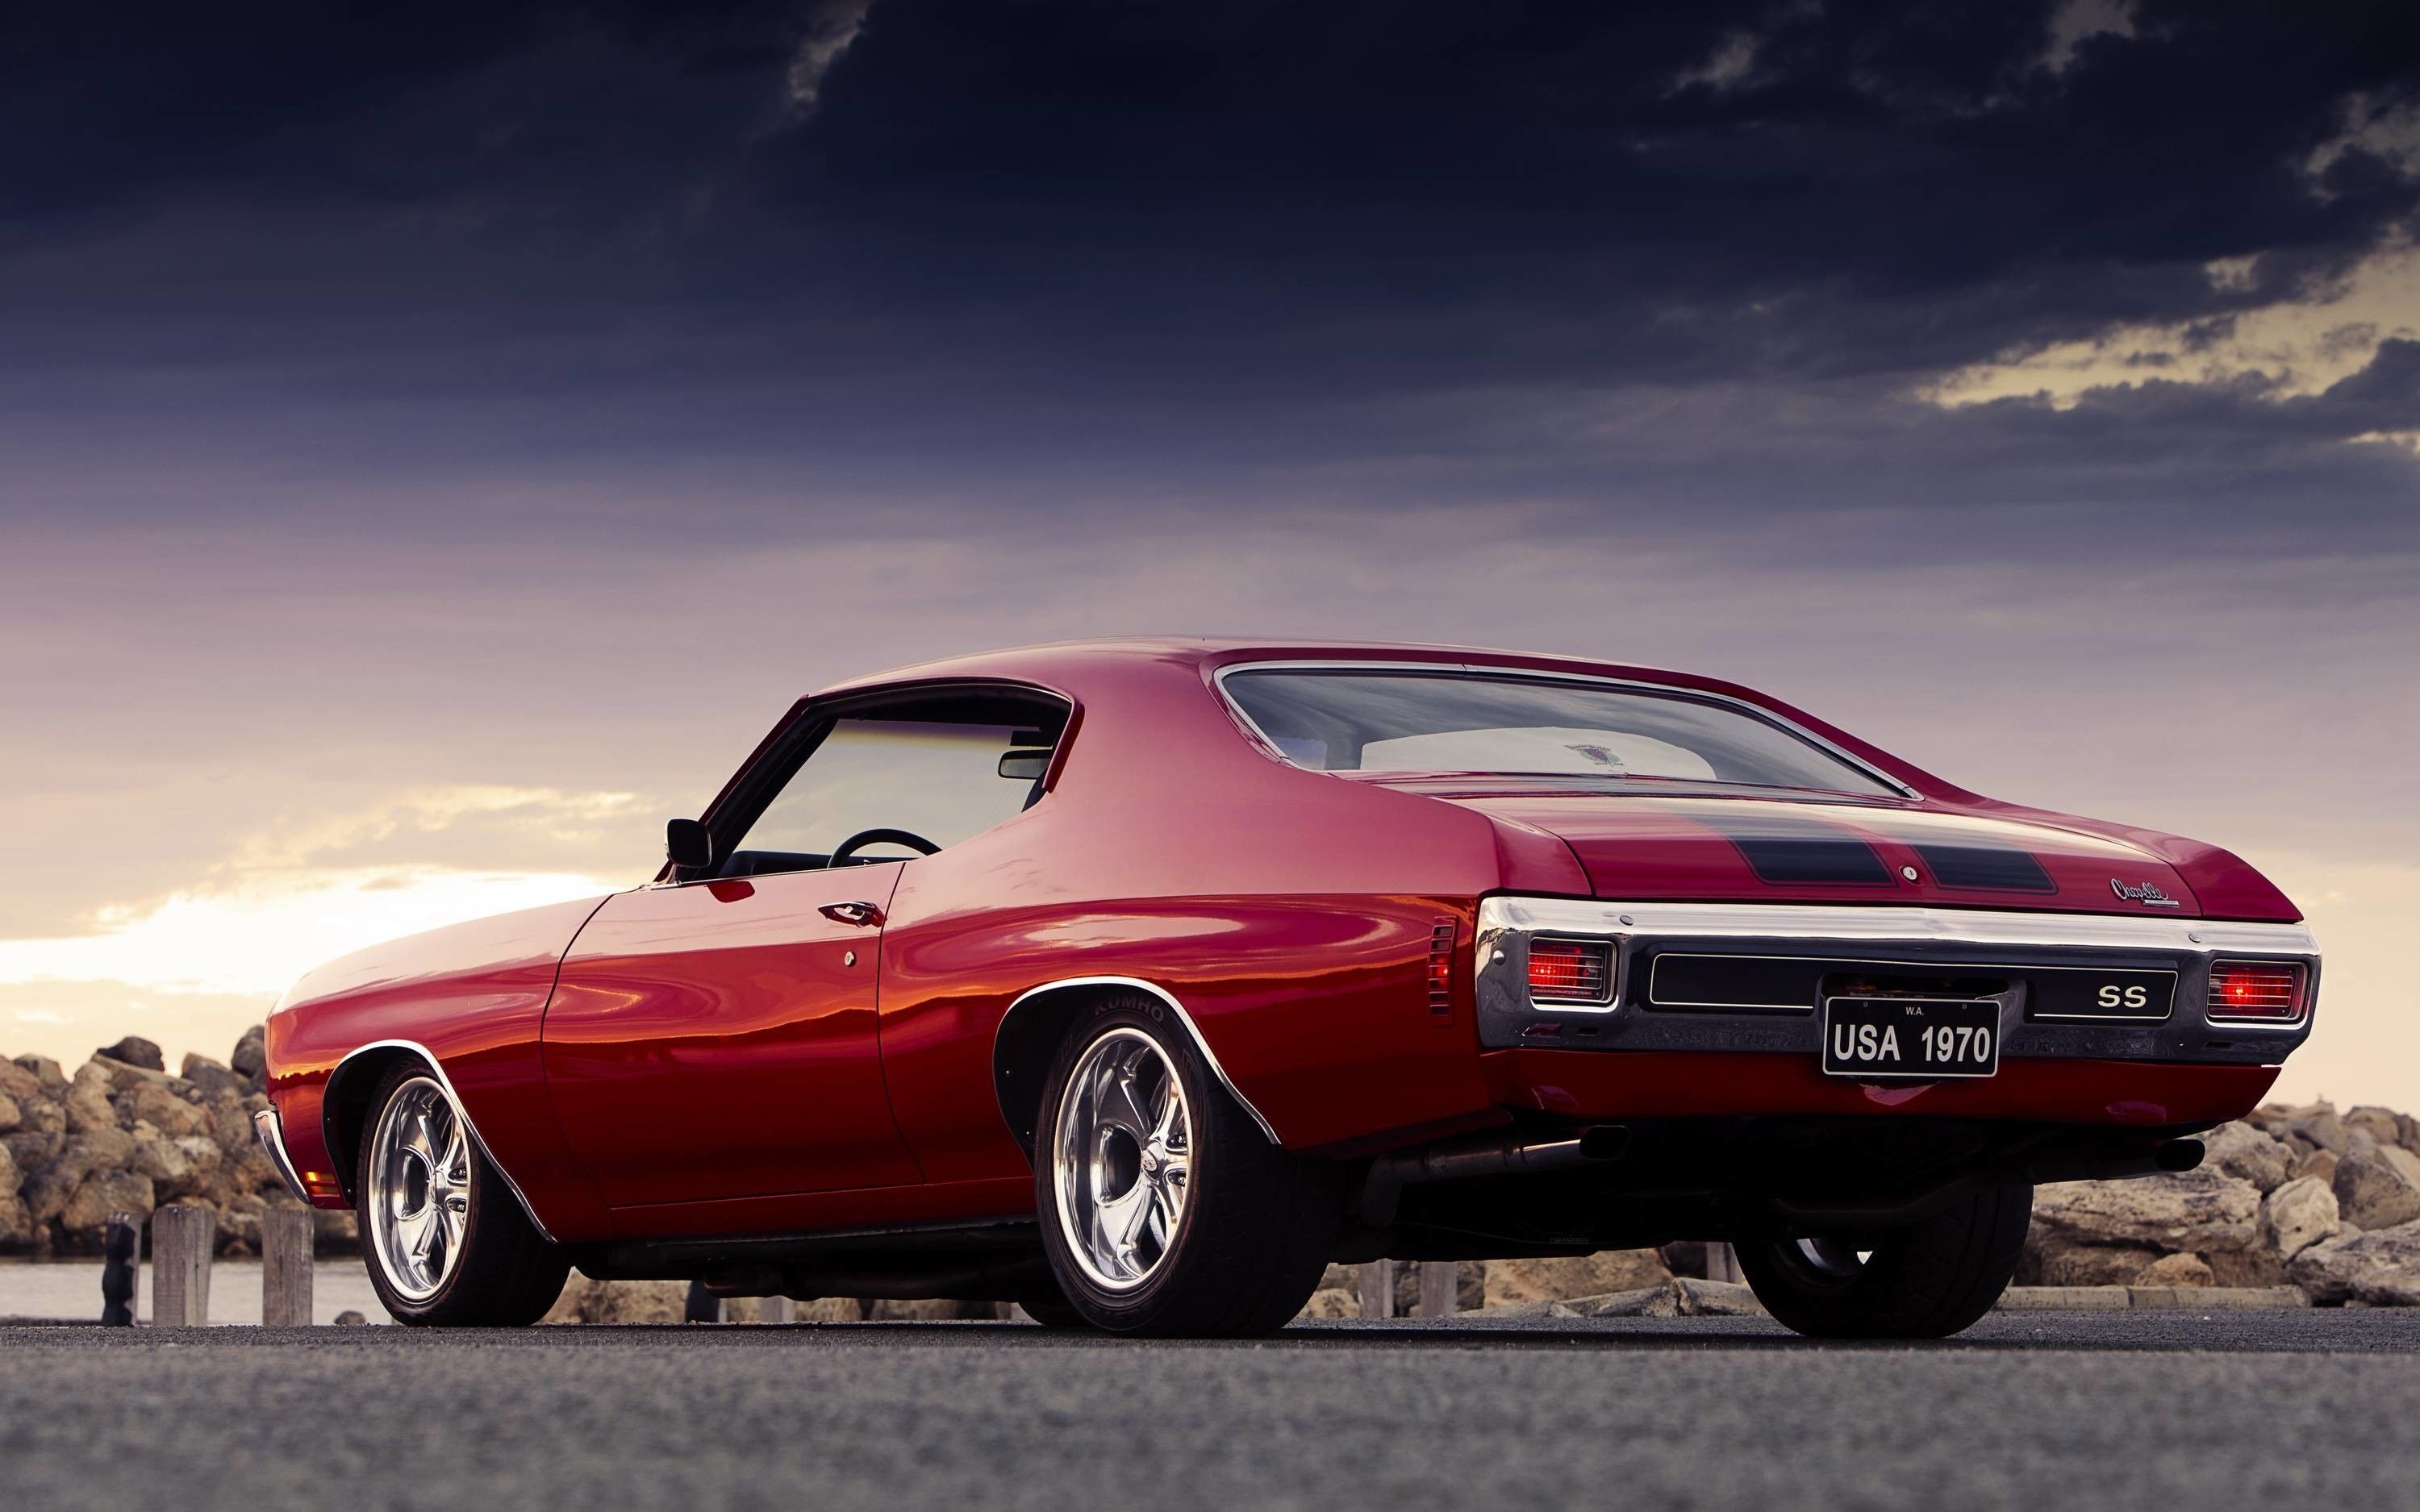 Chevelle SS, Muscle car stance, Timeless profile, American horsepower, Auto heritage, 3000x1880 HD Desktop